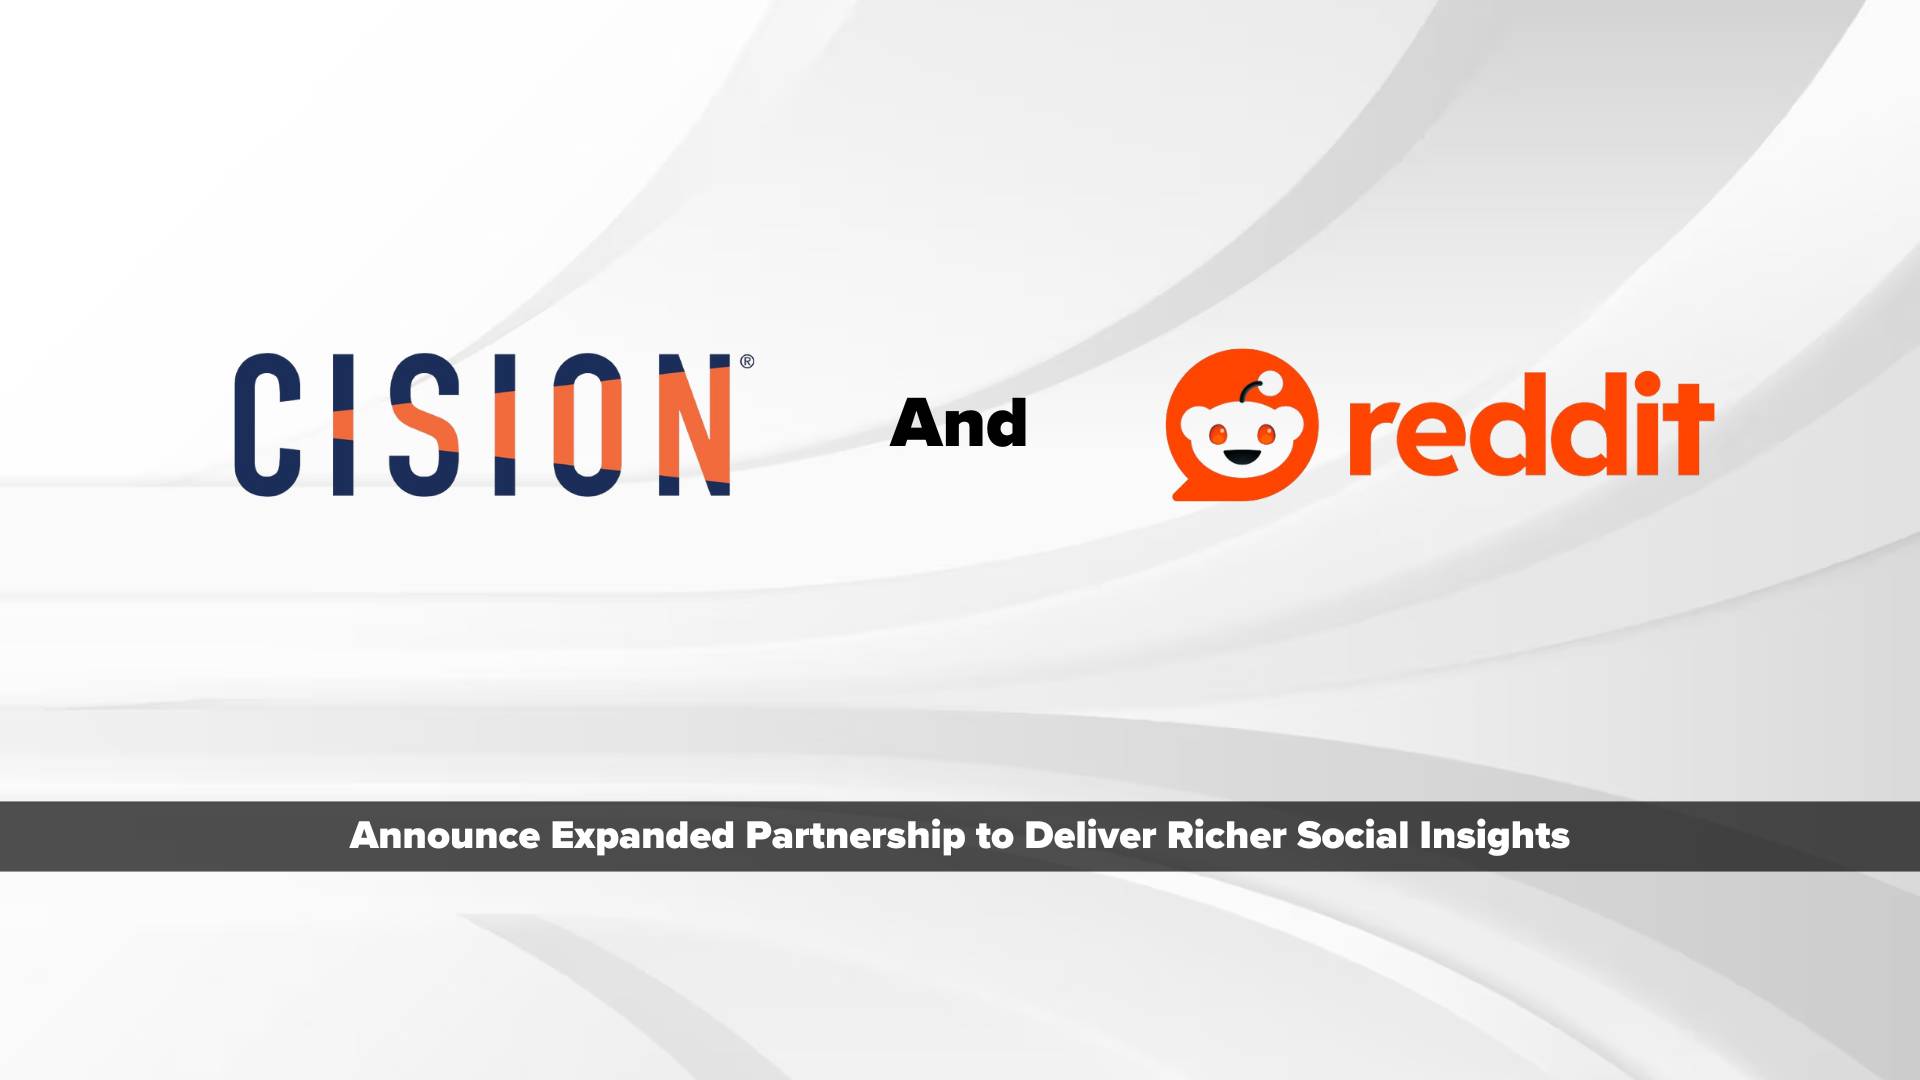 Cision and Reddit Announce Expanded Partnership to Deliver Richer Social Insights